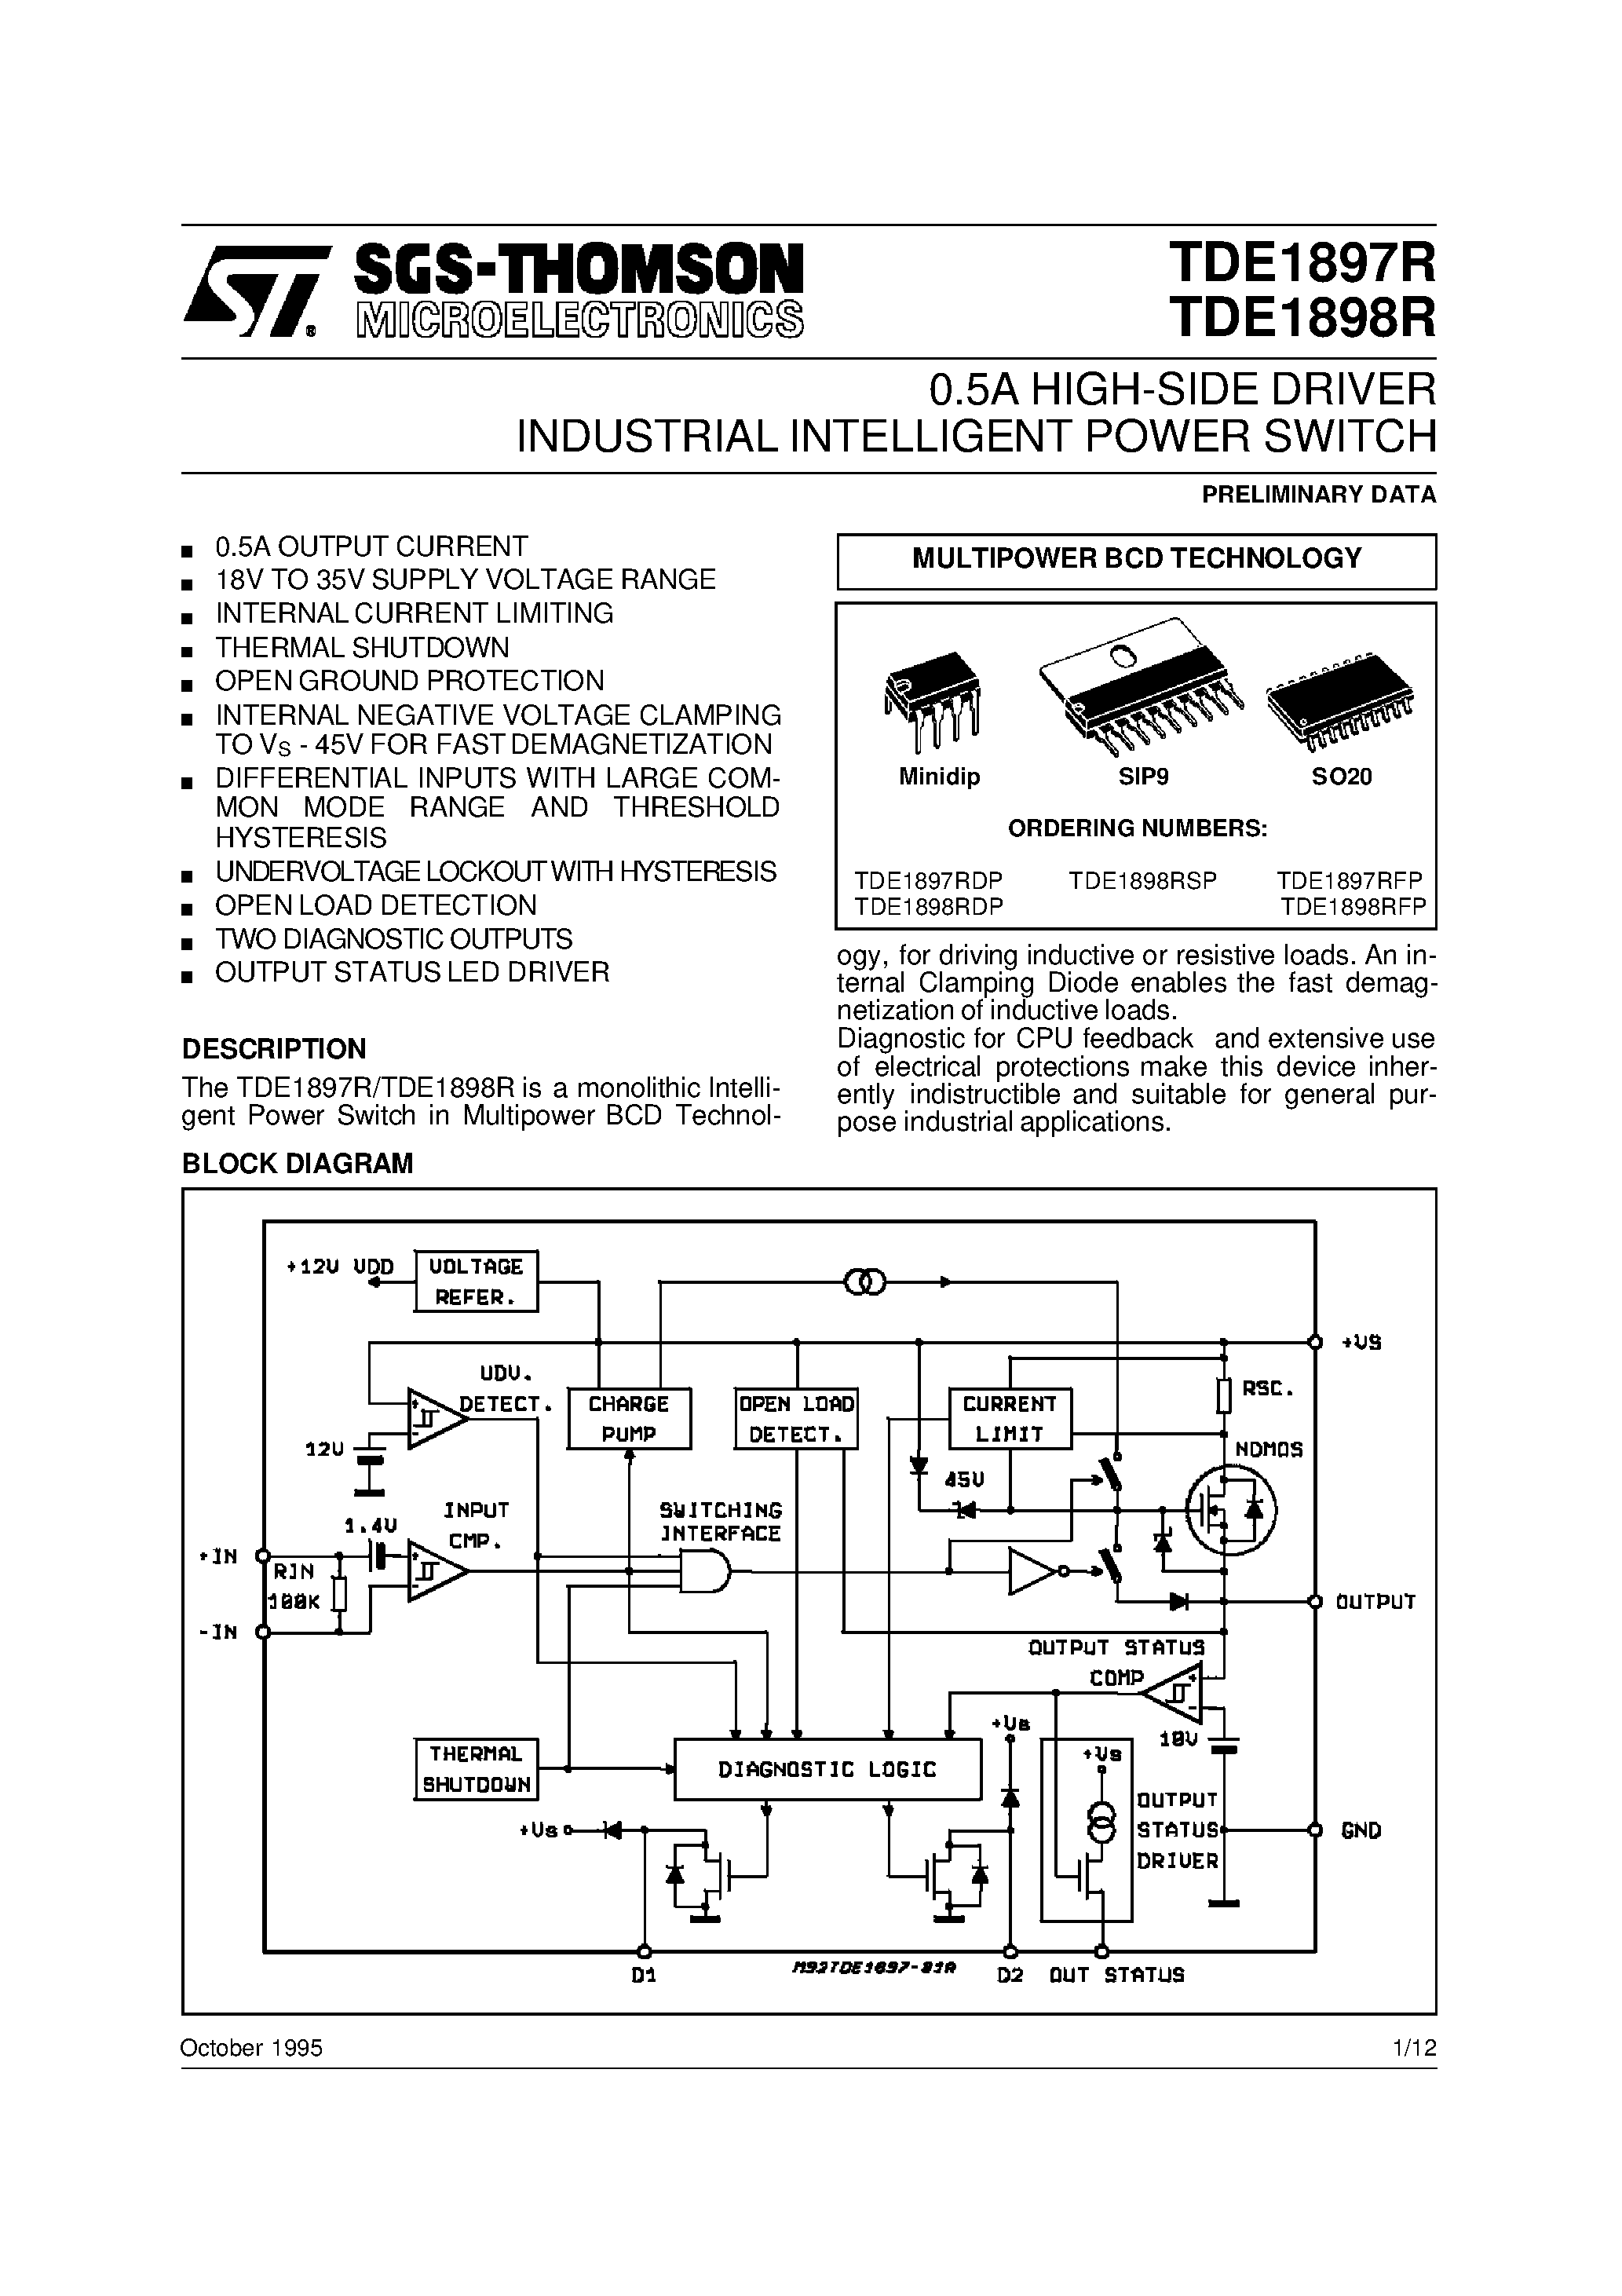 Даташит TDE1898RSP - 0.5A HIGH-SIDE DRIVER INDUSTRIAL INTELLIGENT POWER SWITCH страница 1